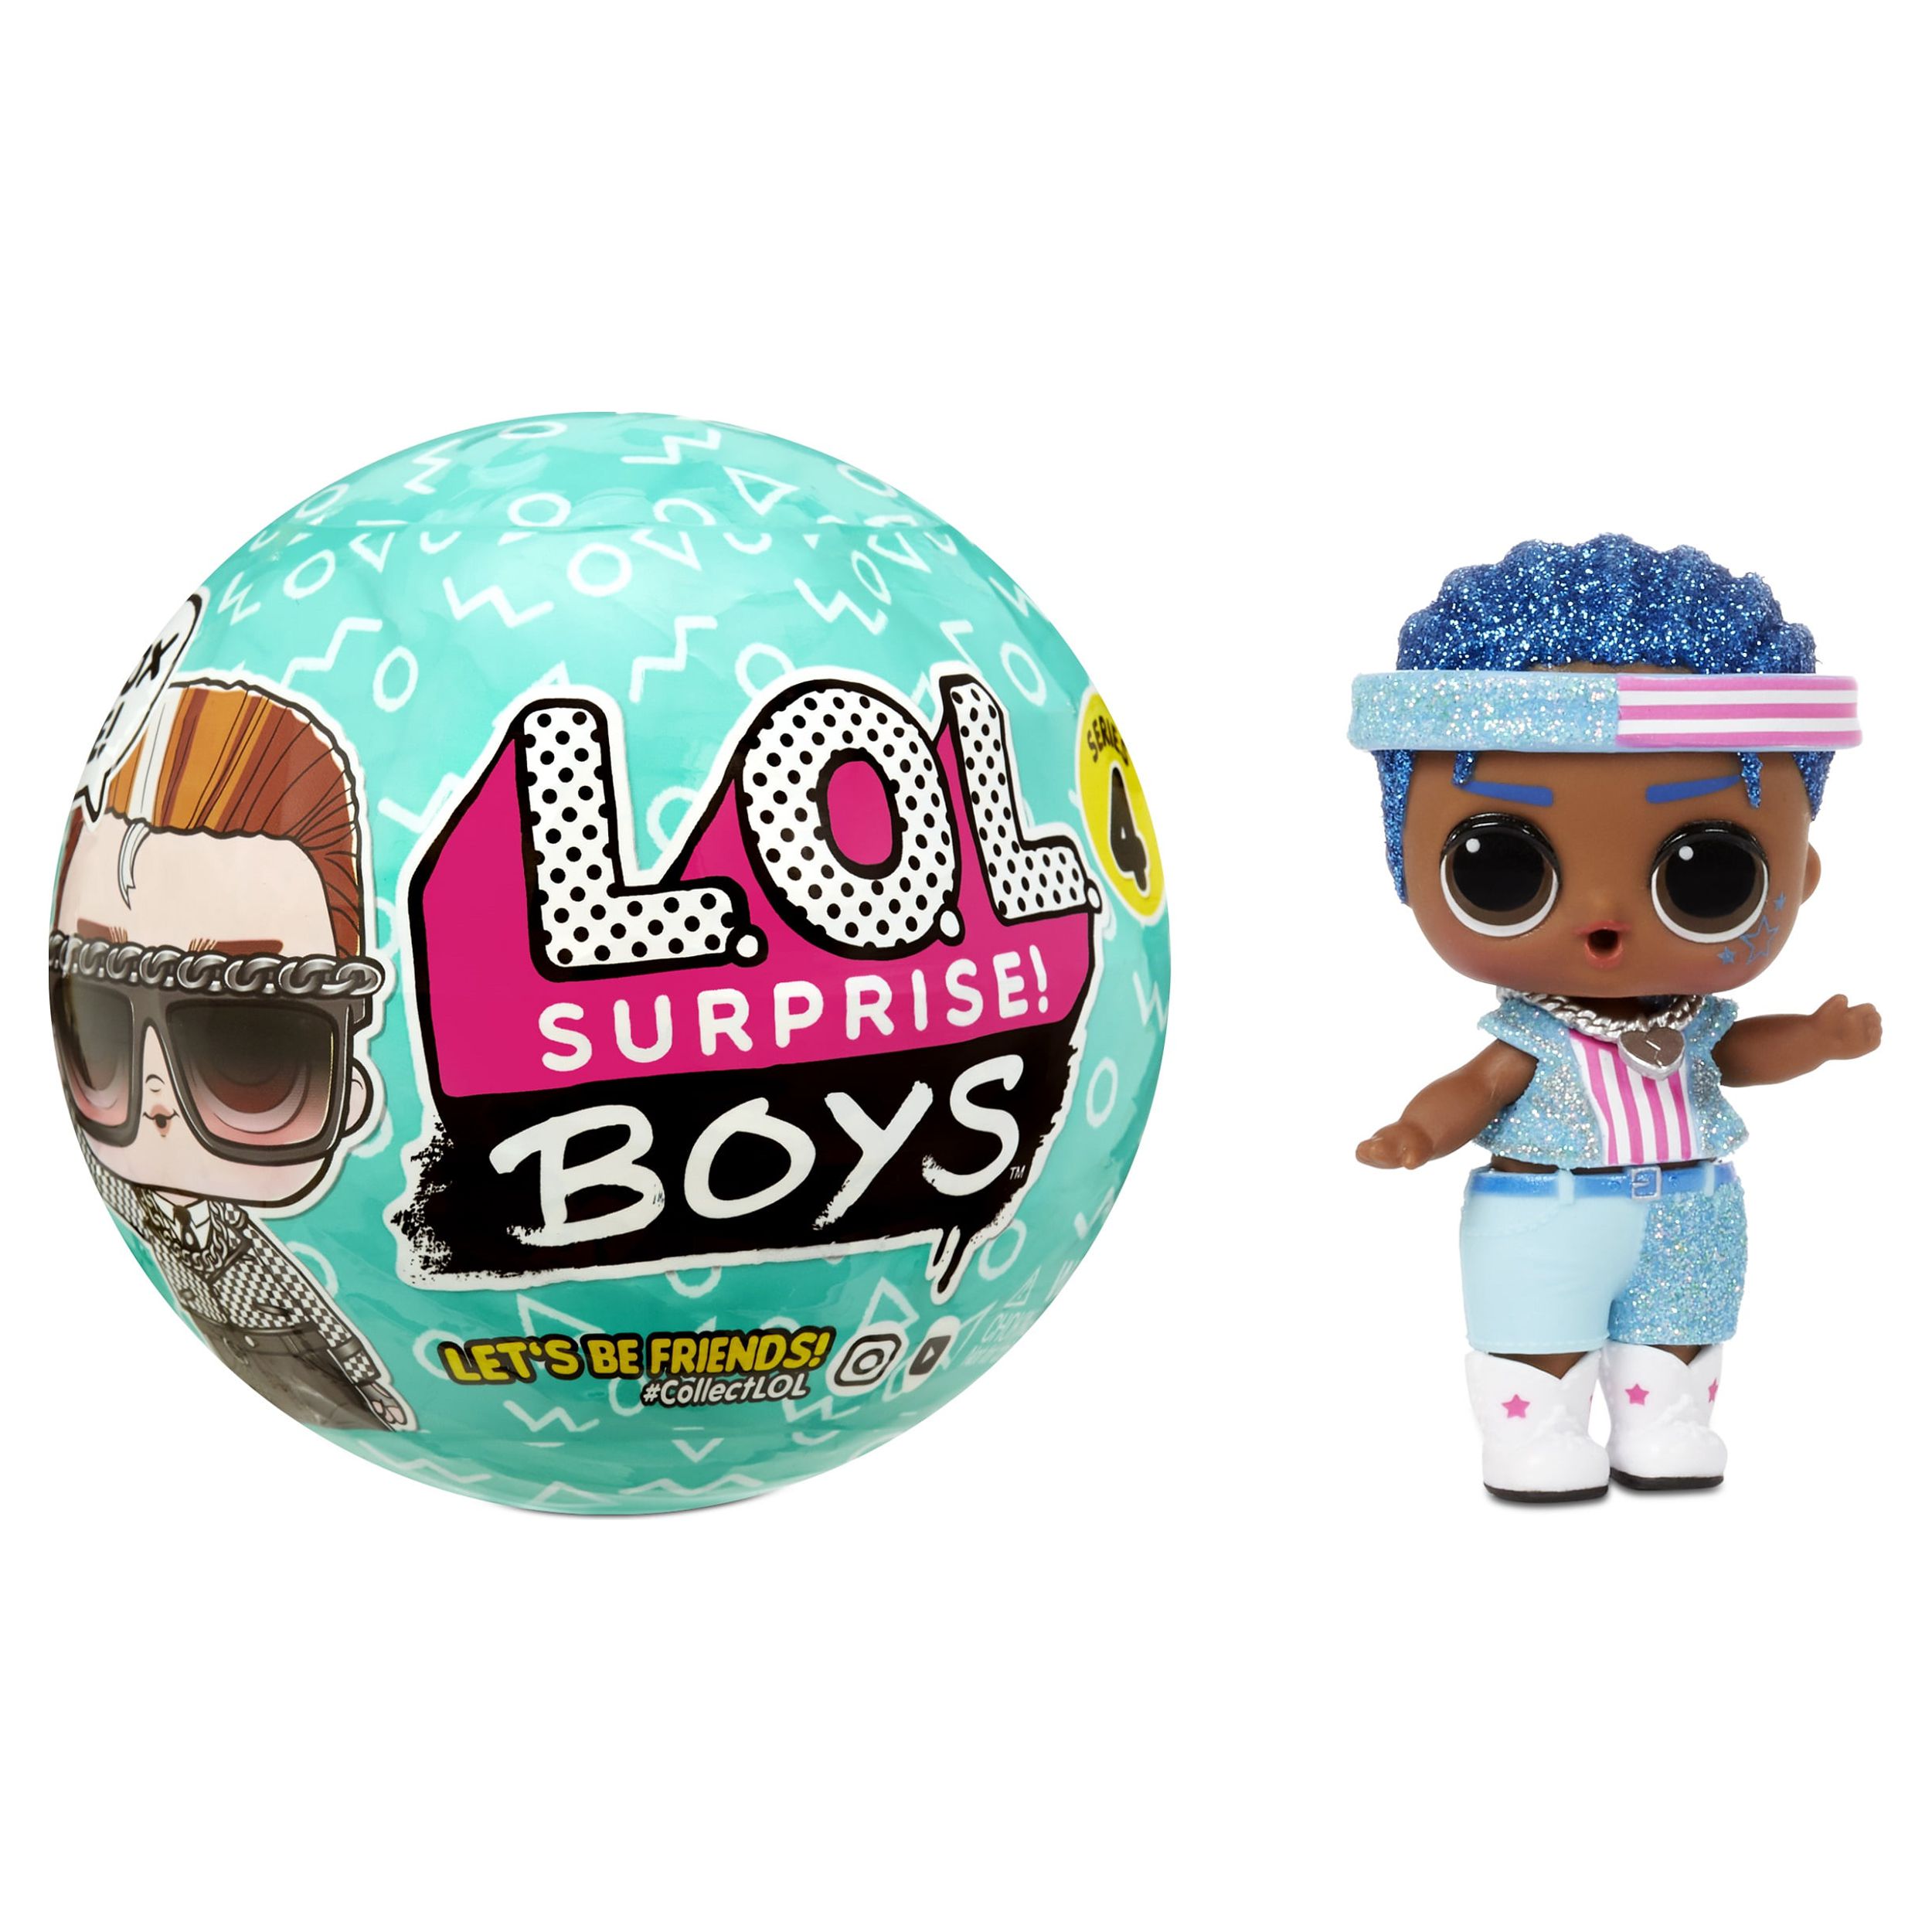 LOL Surprise Boys Series 4 Boy Doll With 7 Surprises, Accessories, Surprise Dolls, Great Gift for Kids Ages 4 5 6+ - image 1 of 7